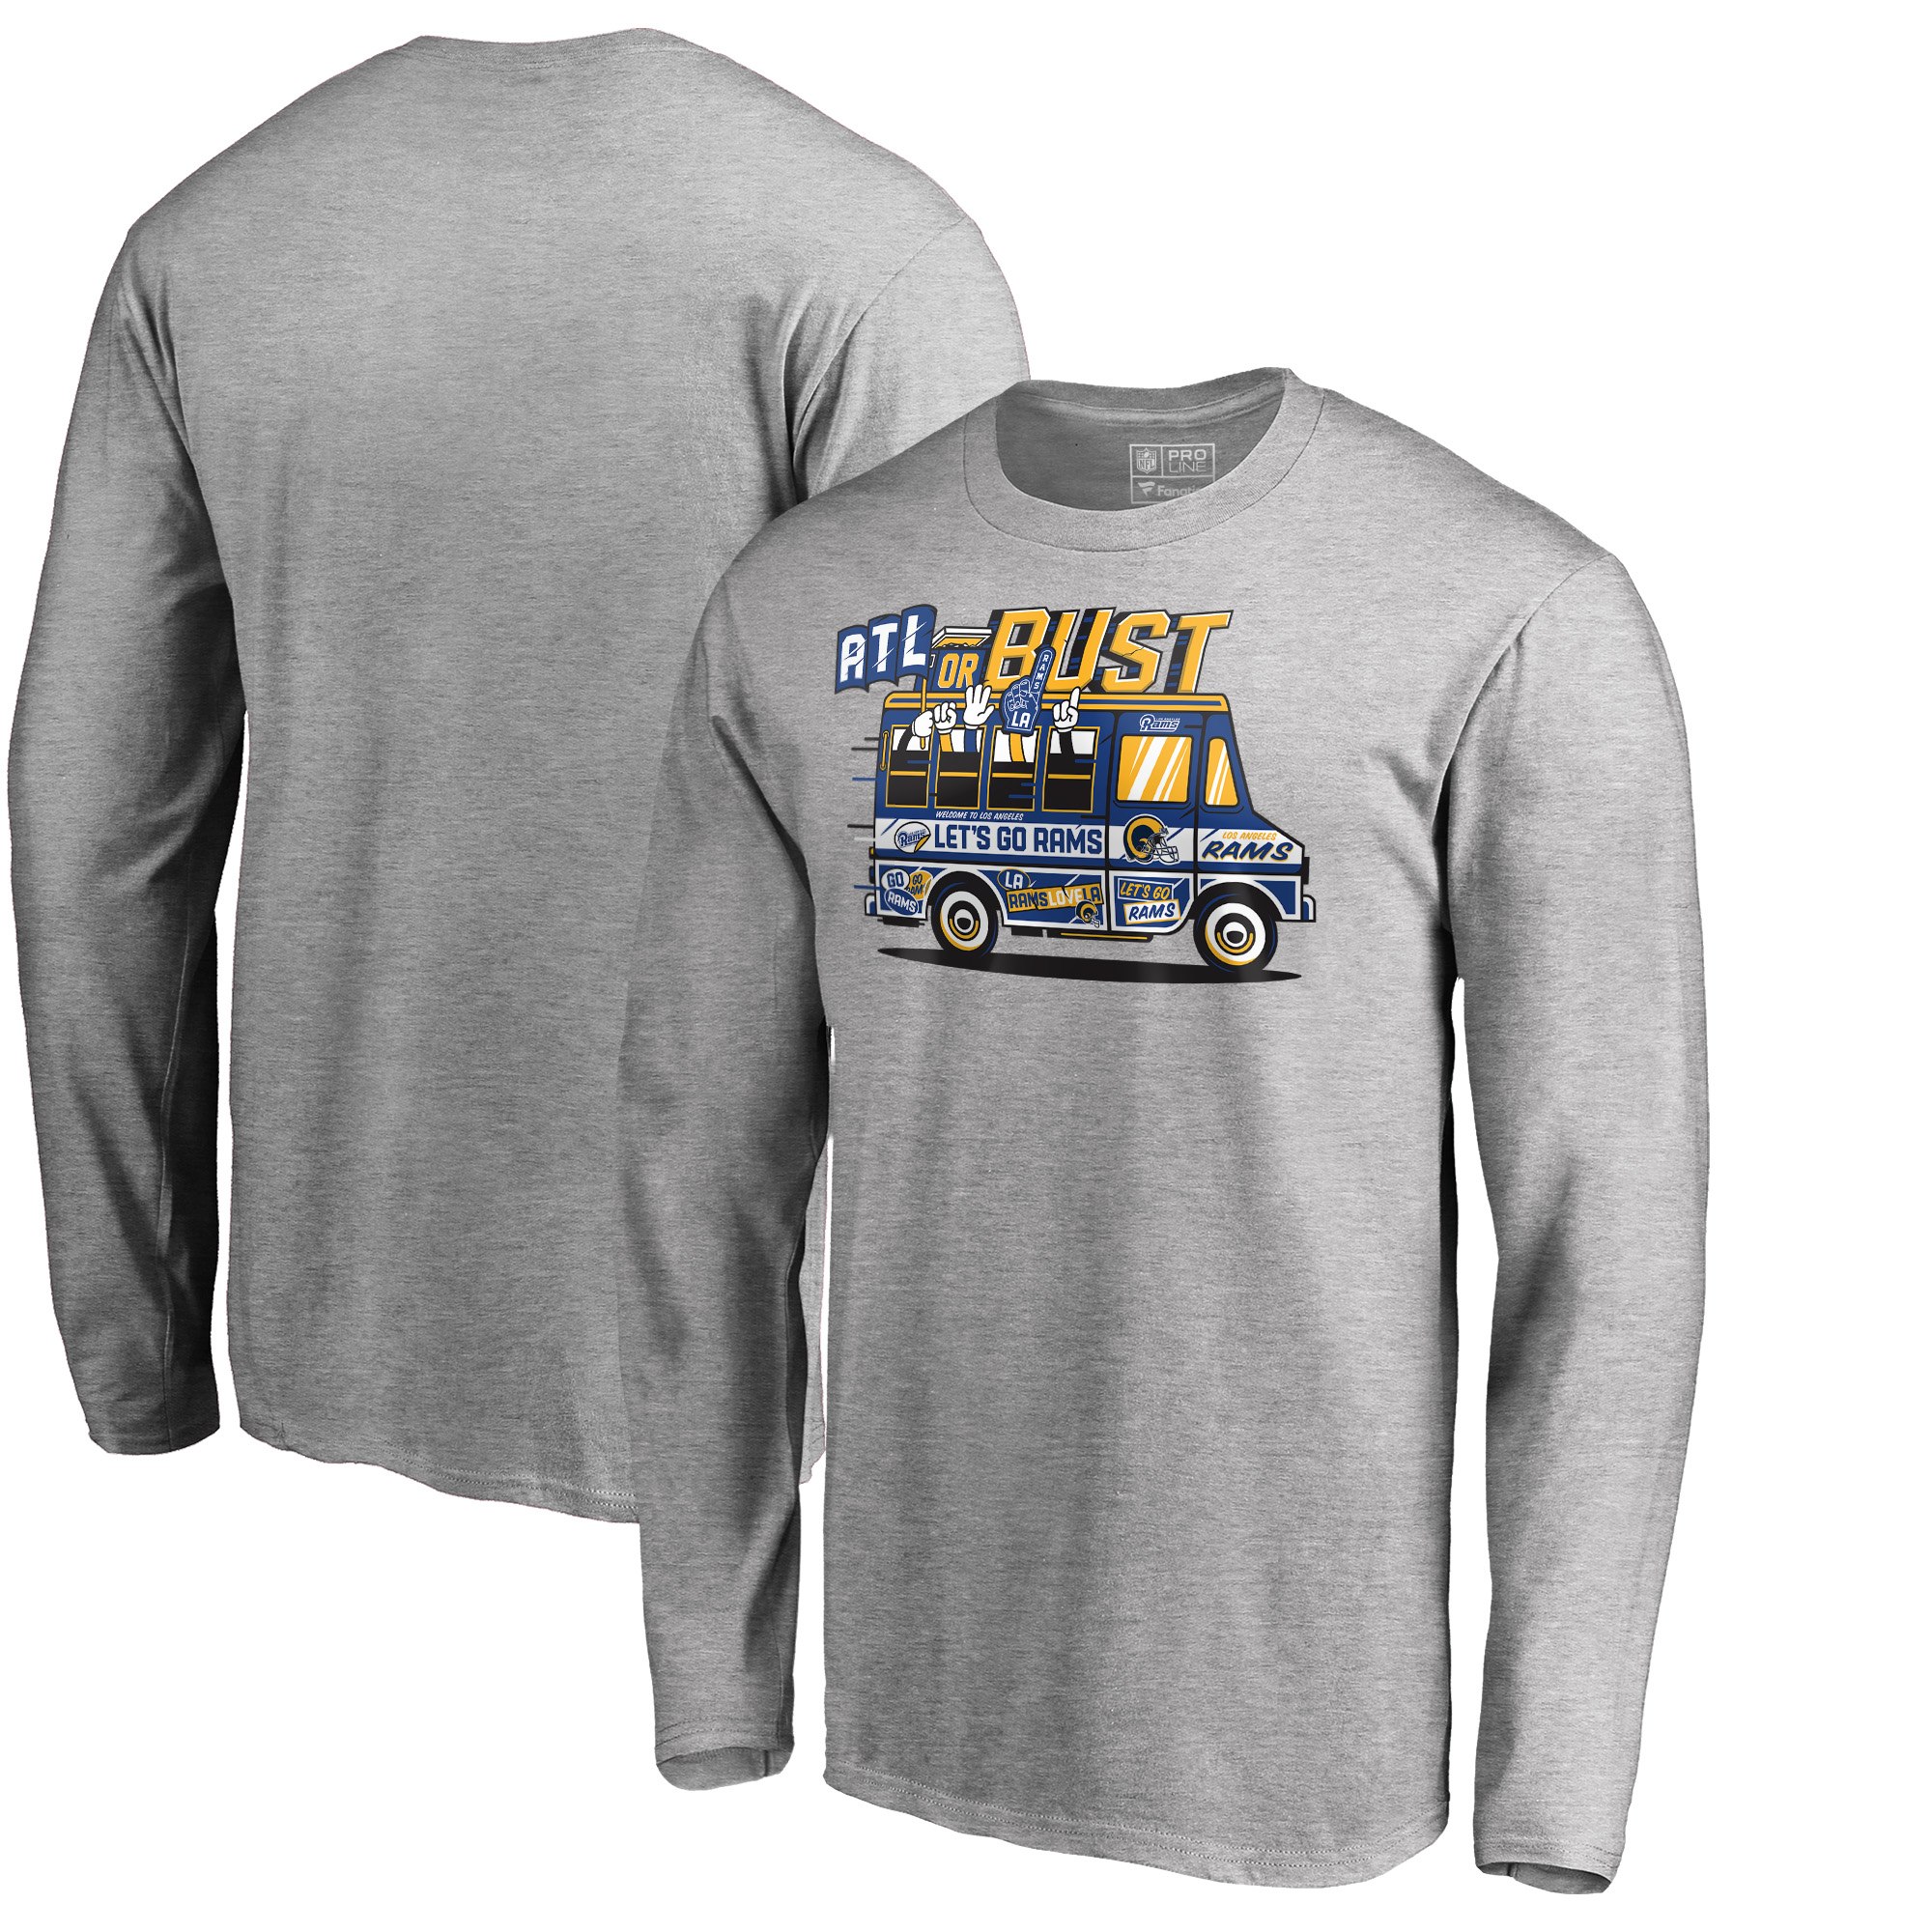 Los Angeles Rams NFL Pro Line by Fanatics Branded Super Bowl LIII Bound ATL Or Bust Long Sleeve T-Shirt Heather Gray